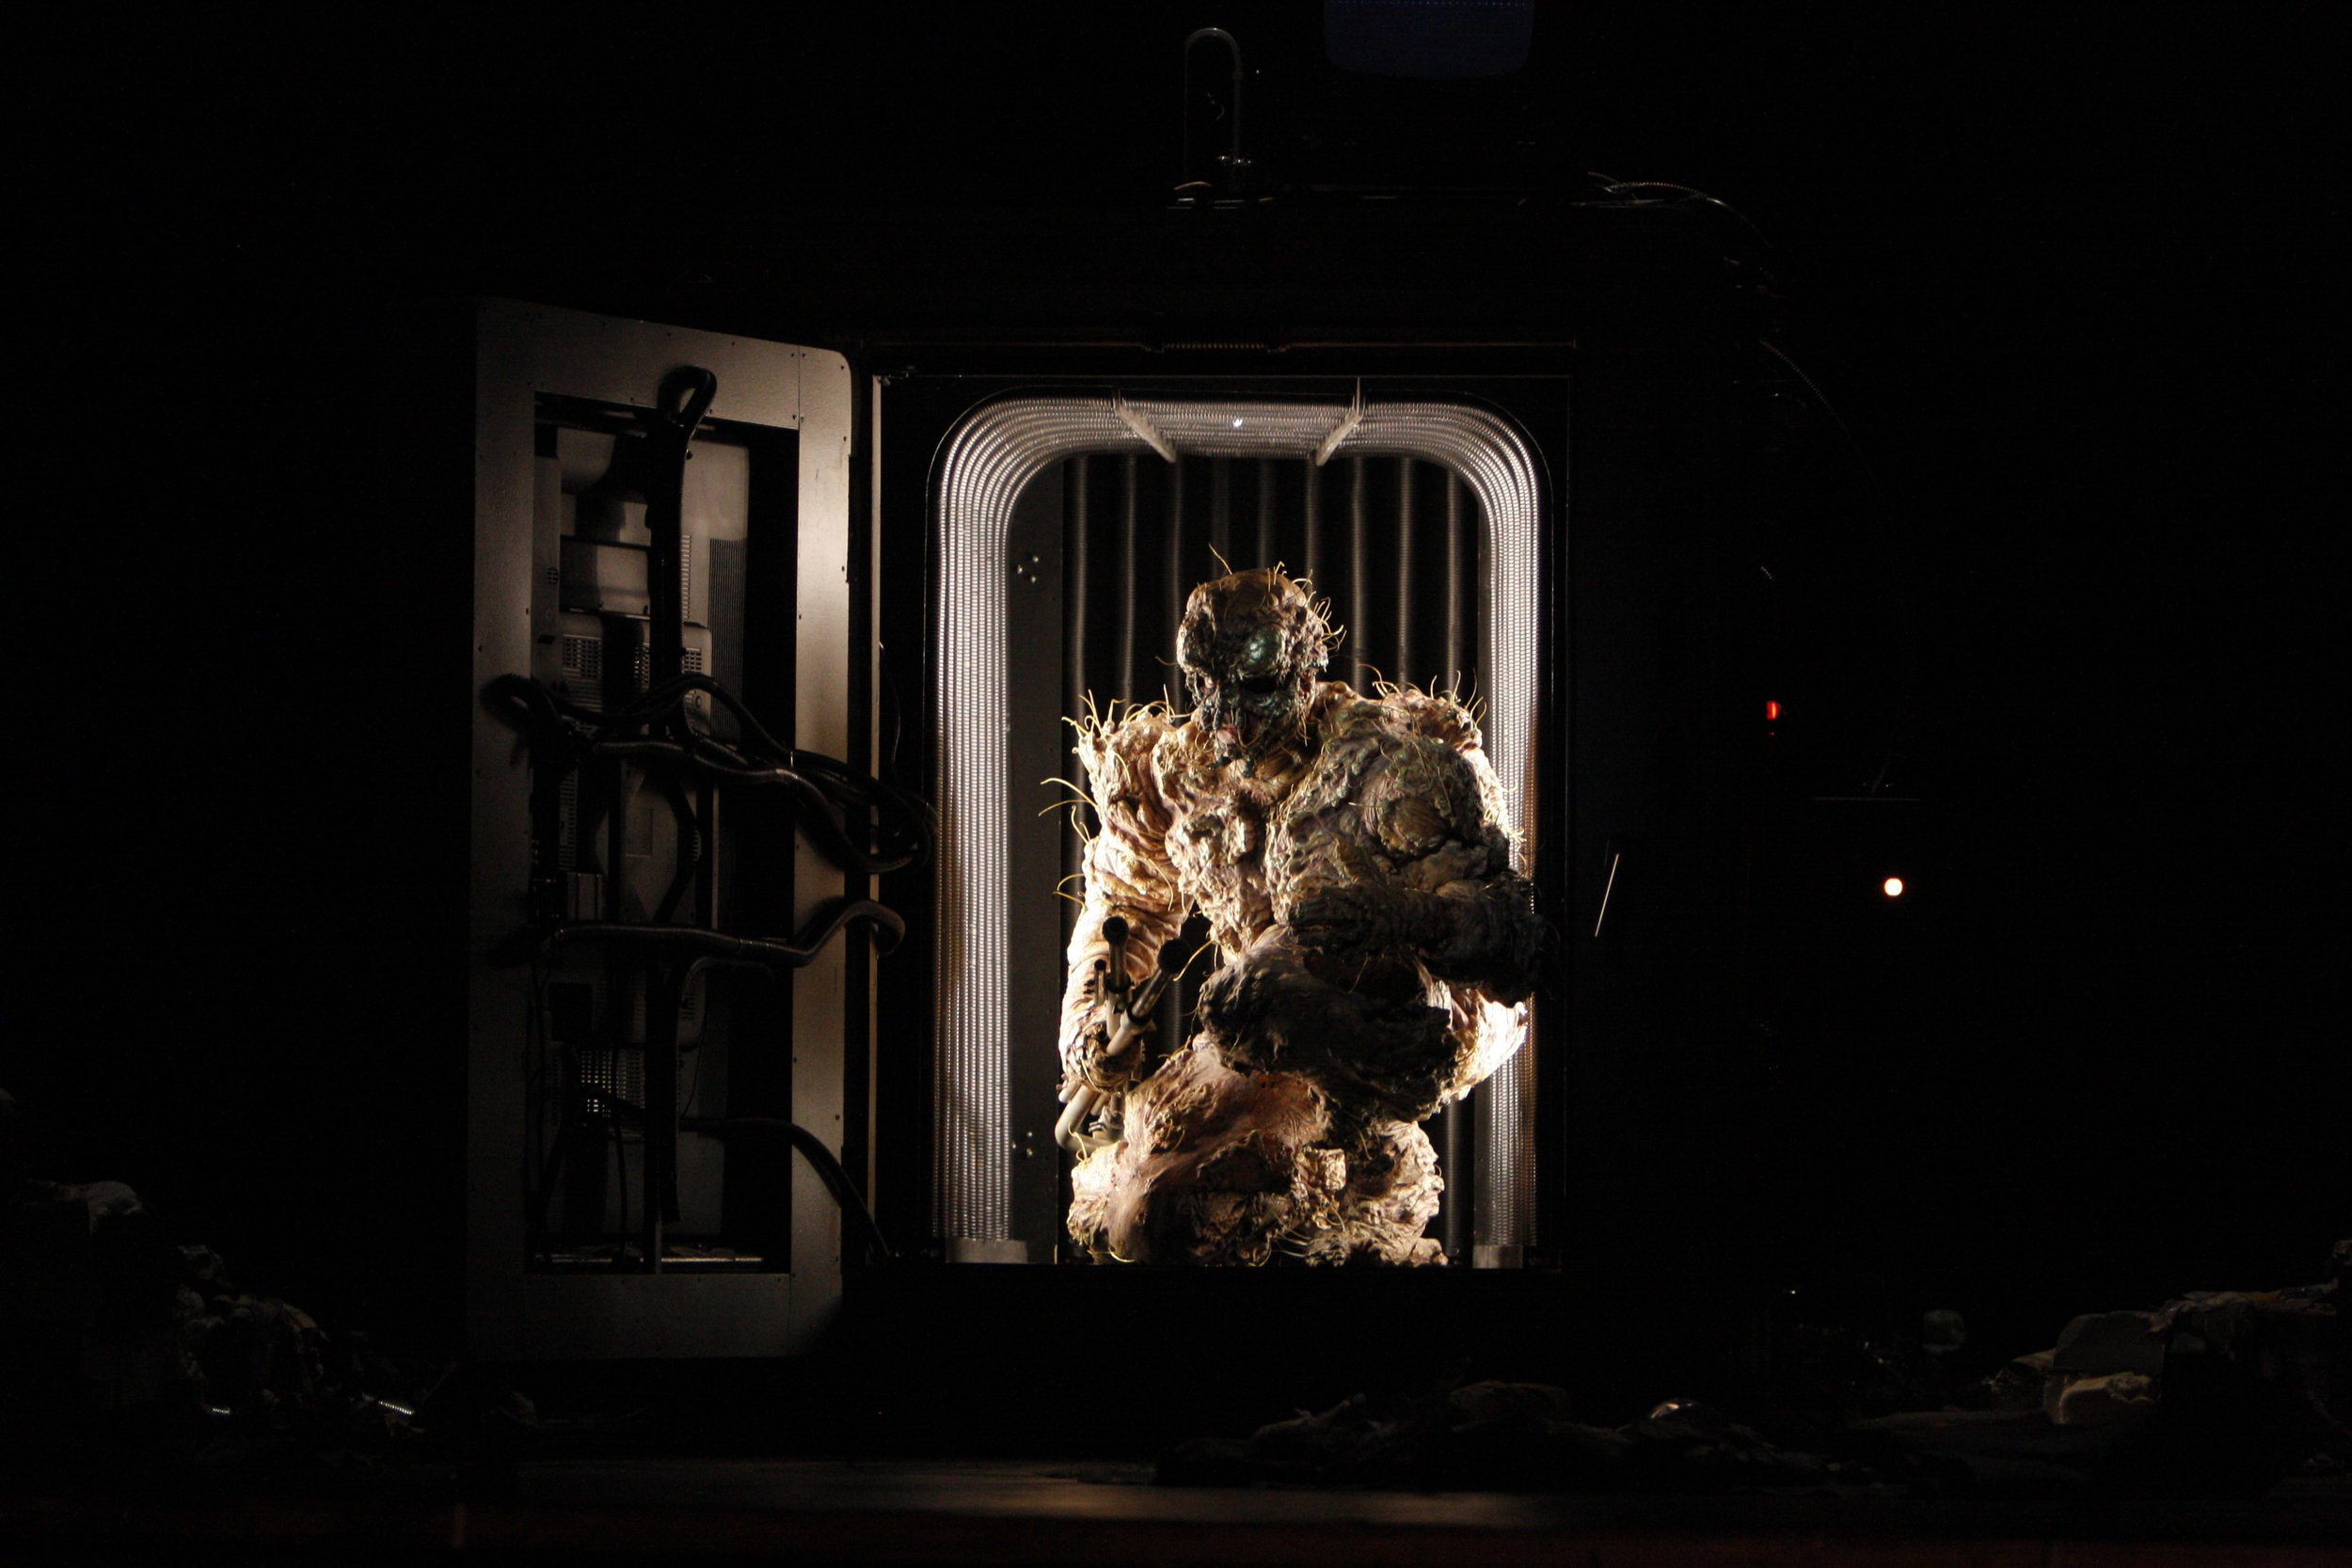 Daniel Okulitch as Seth Brundle in The Fly. Photo by Robert Millard for the Los Angeles Opera, 2008